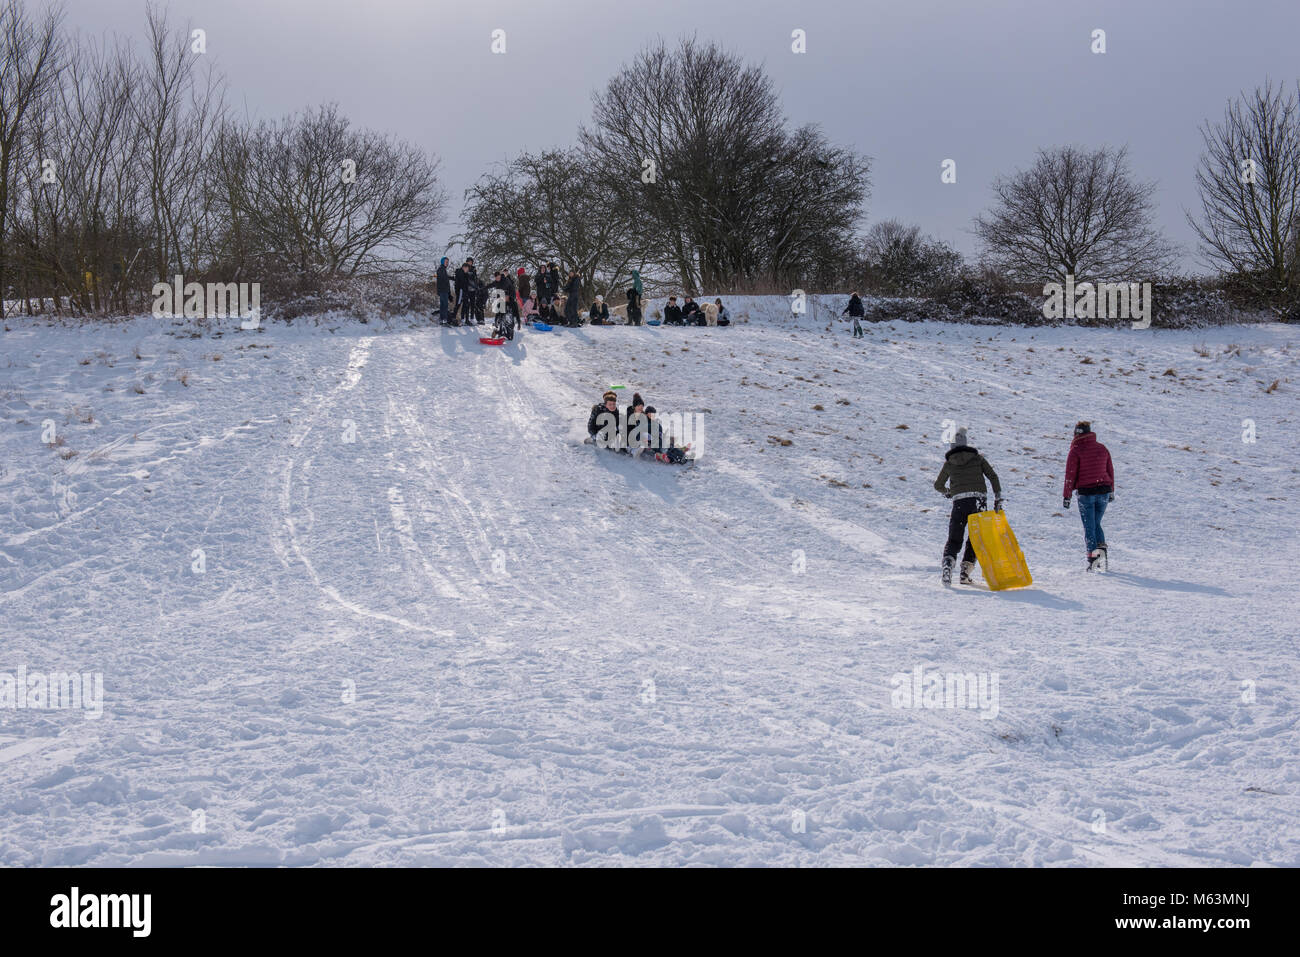 Colchester, Essex, UK. 28 February 2018. With schools closed because of the wintry weather, children enjoy some sledging in Hilly Fields park. Credit: Gary Eason/Alamy Live News Stock Photo